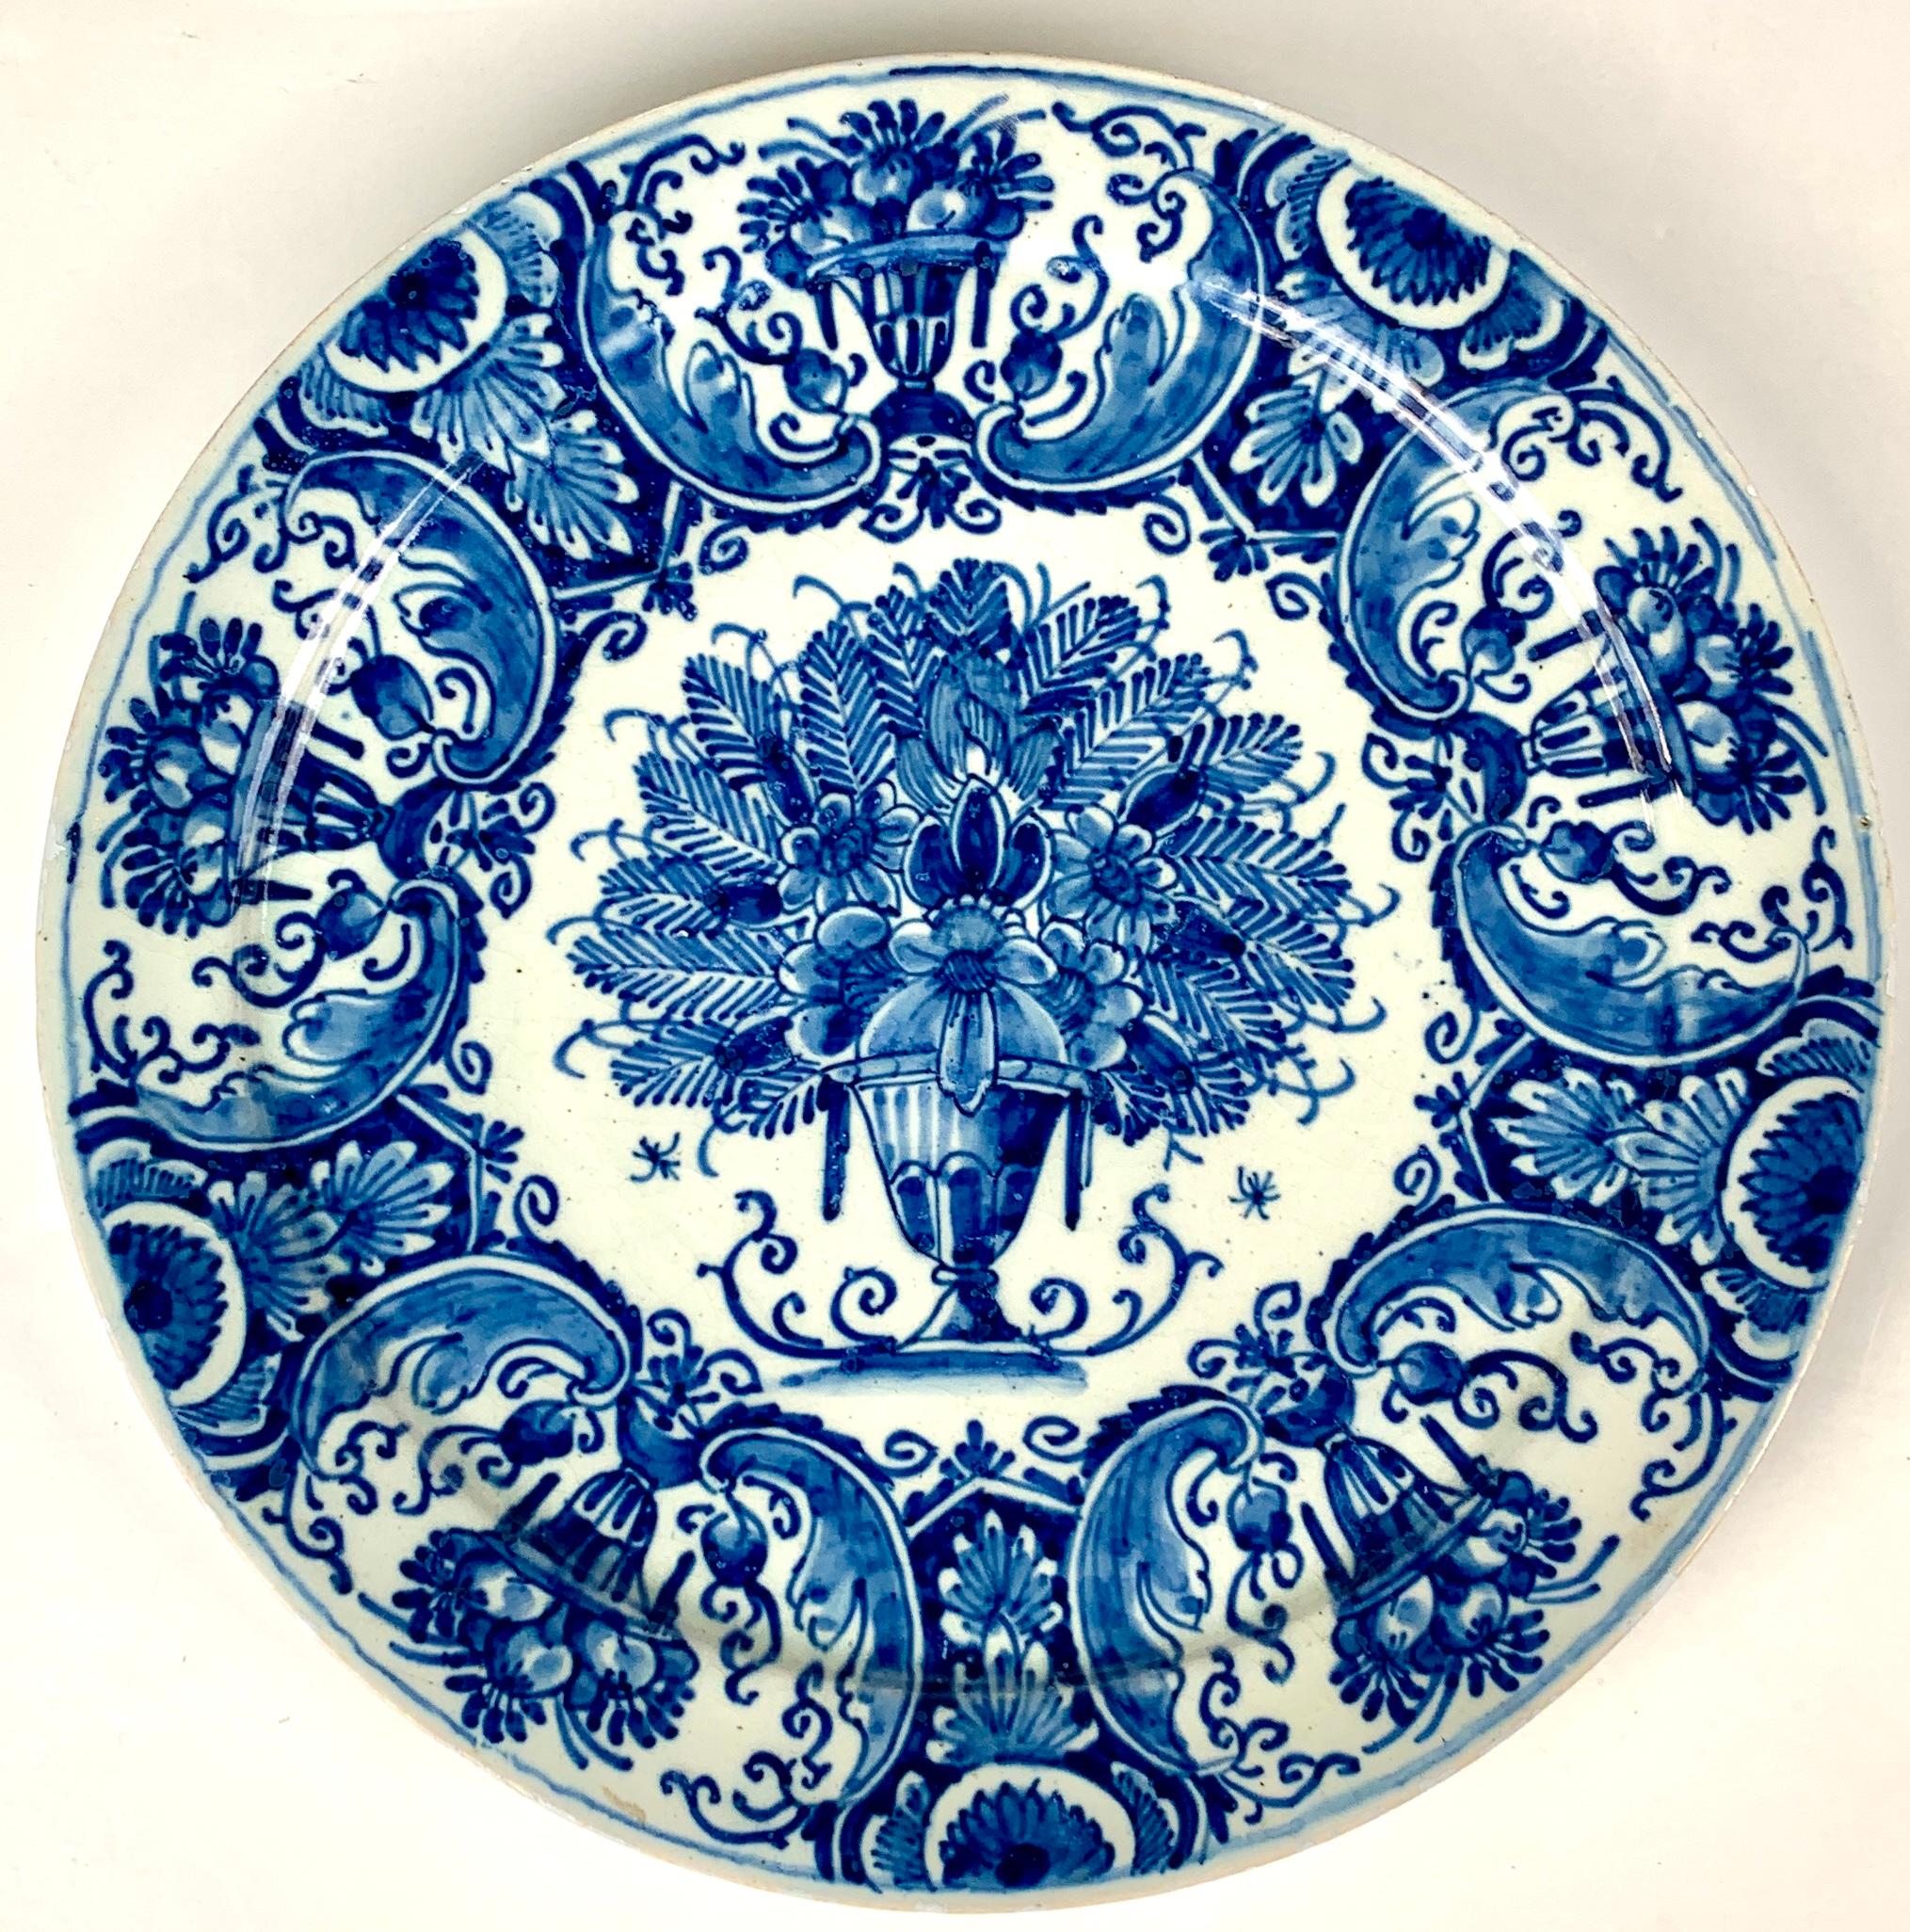 Made in The Netherlands circa 1770, this set of large Dutch Delft blue and white plates is painted in a lovely combination of deep and medium cobalt blue. The central image, a vase overflowing with ferns and summer flowers, is exquisite. 
The wide